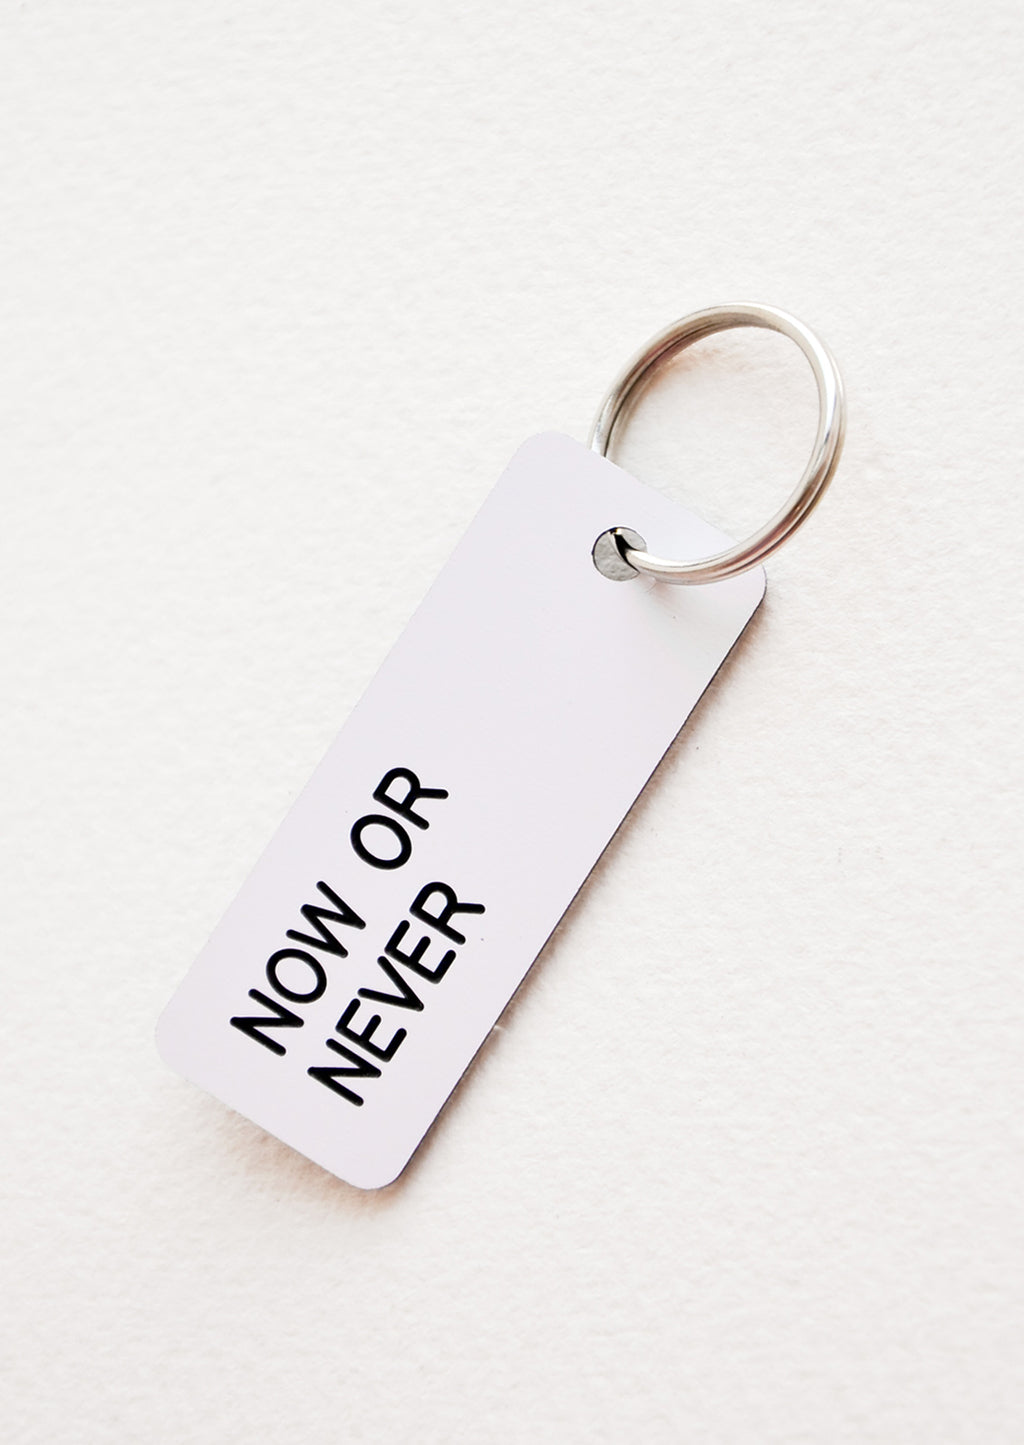 Now or Never: Small acrylic keychain, white background with black words that says "NOW OR NEVER"